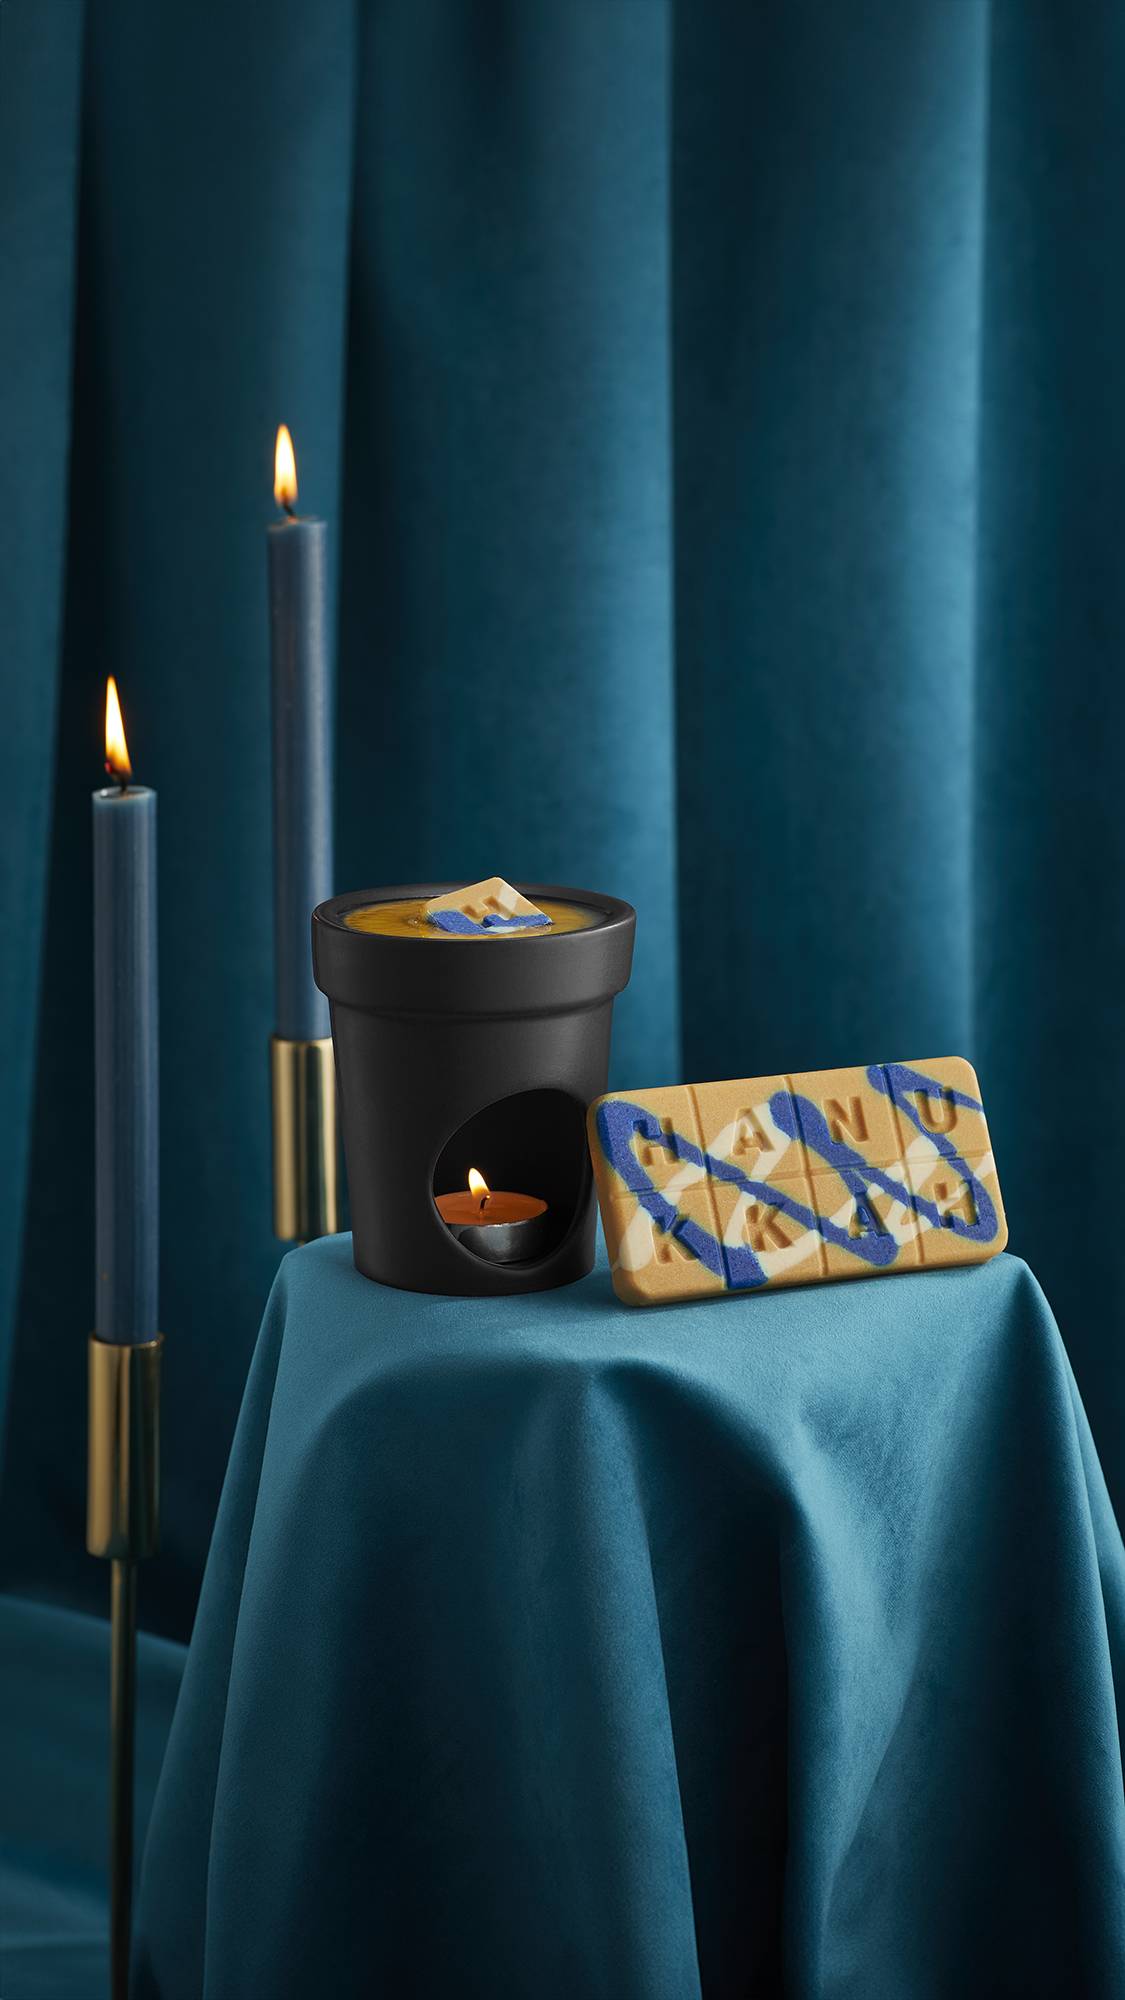 The Lush Gelt Melt is propped against a lit black wax burner with the melt on top, surrounded by deep teal velvet curtains.